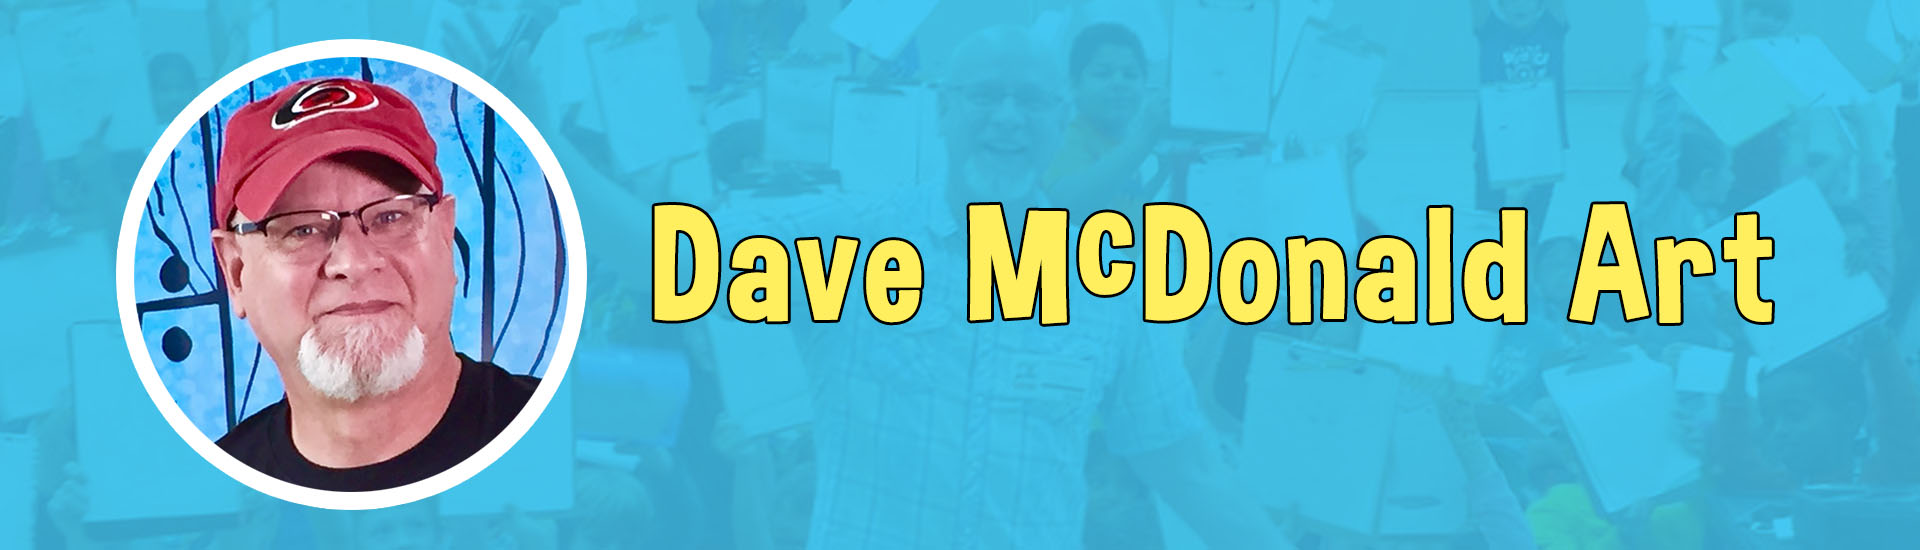 Image for Dave McDonald Art